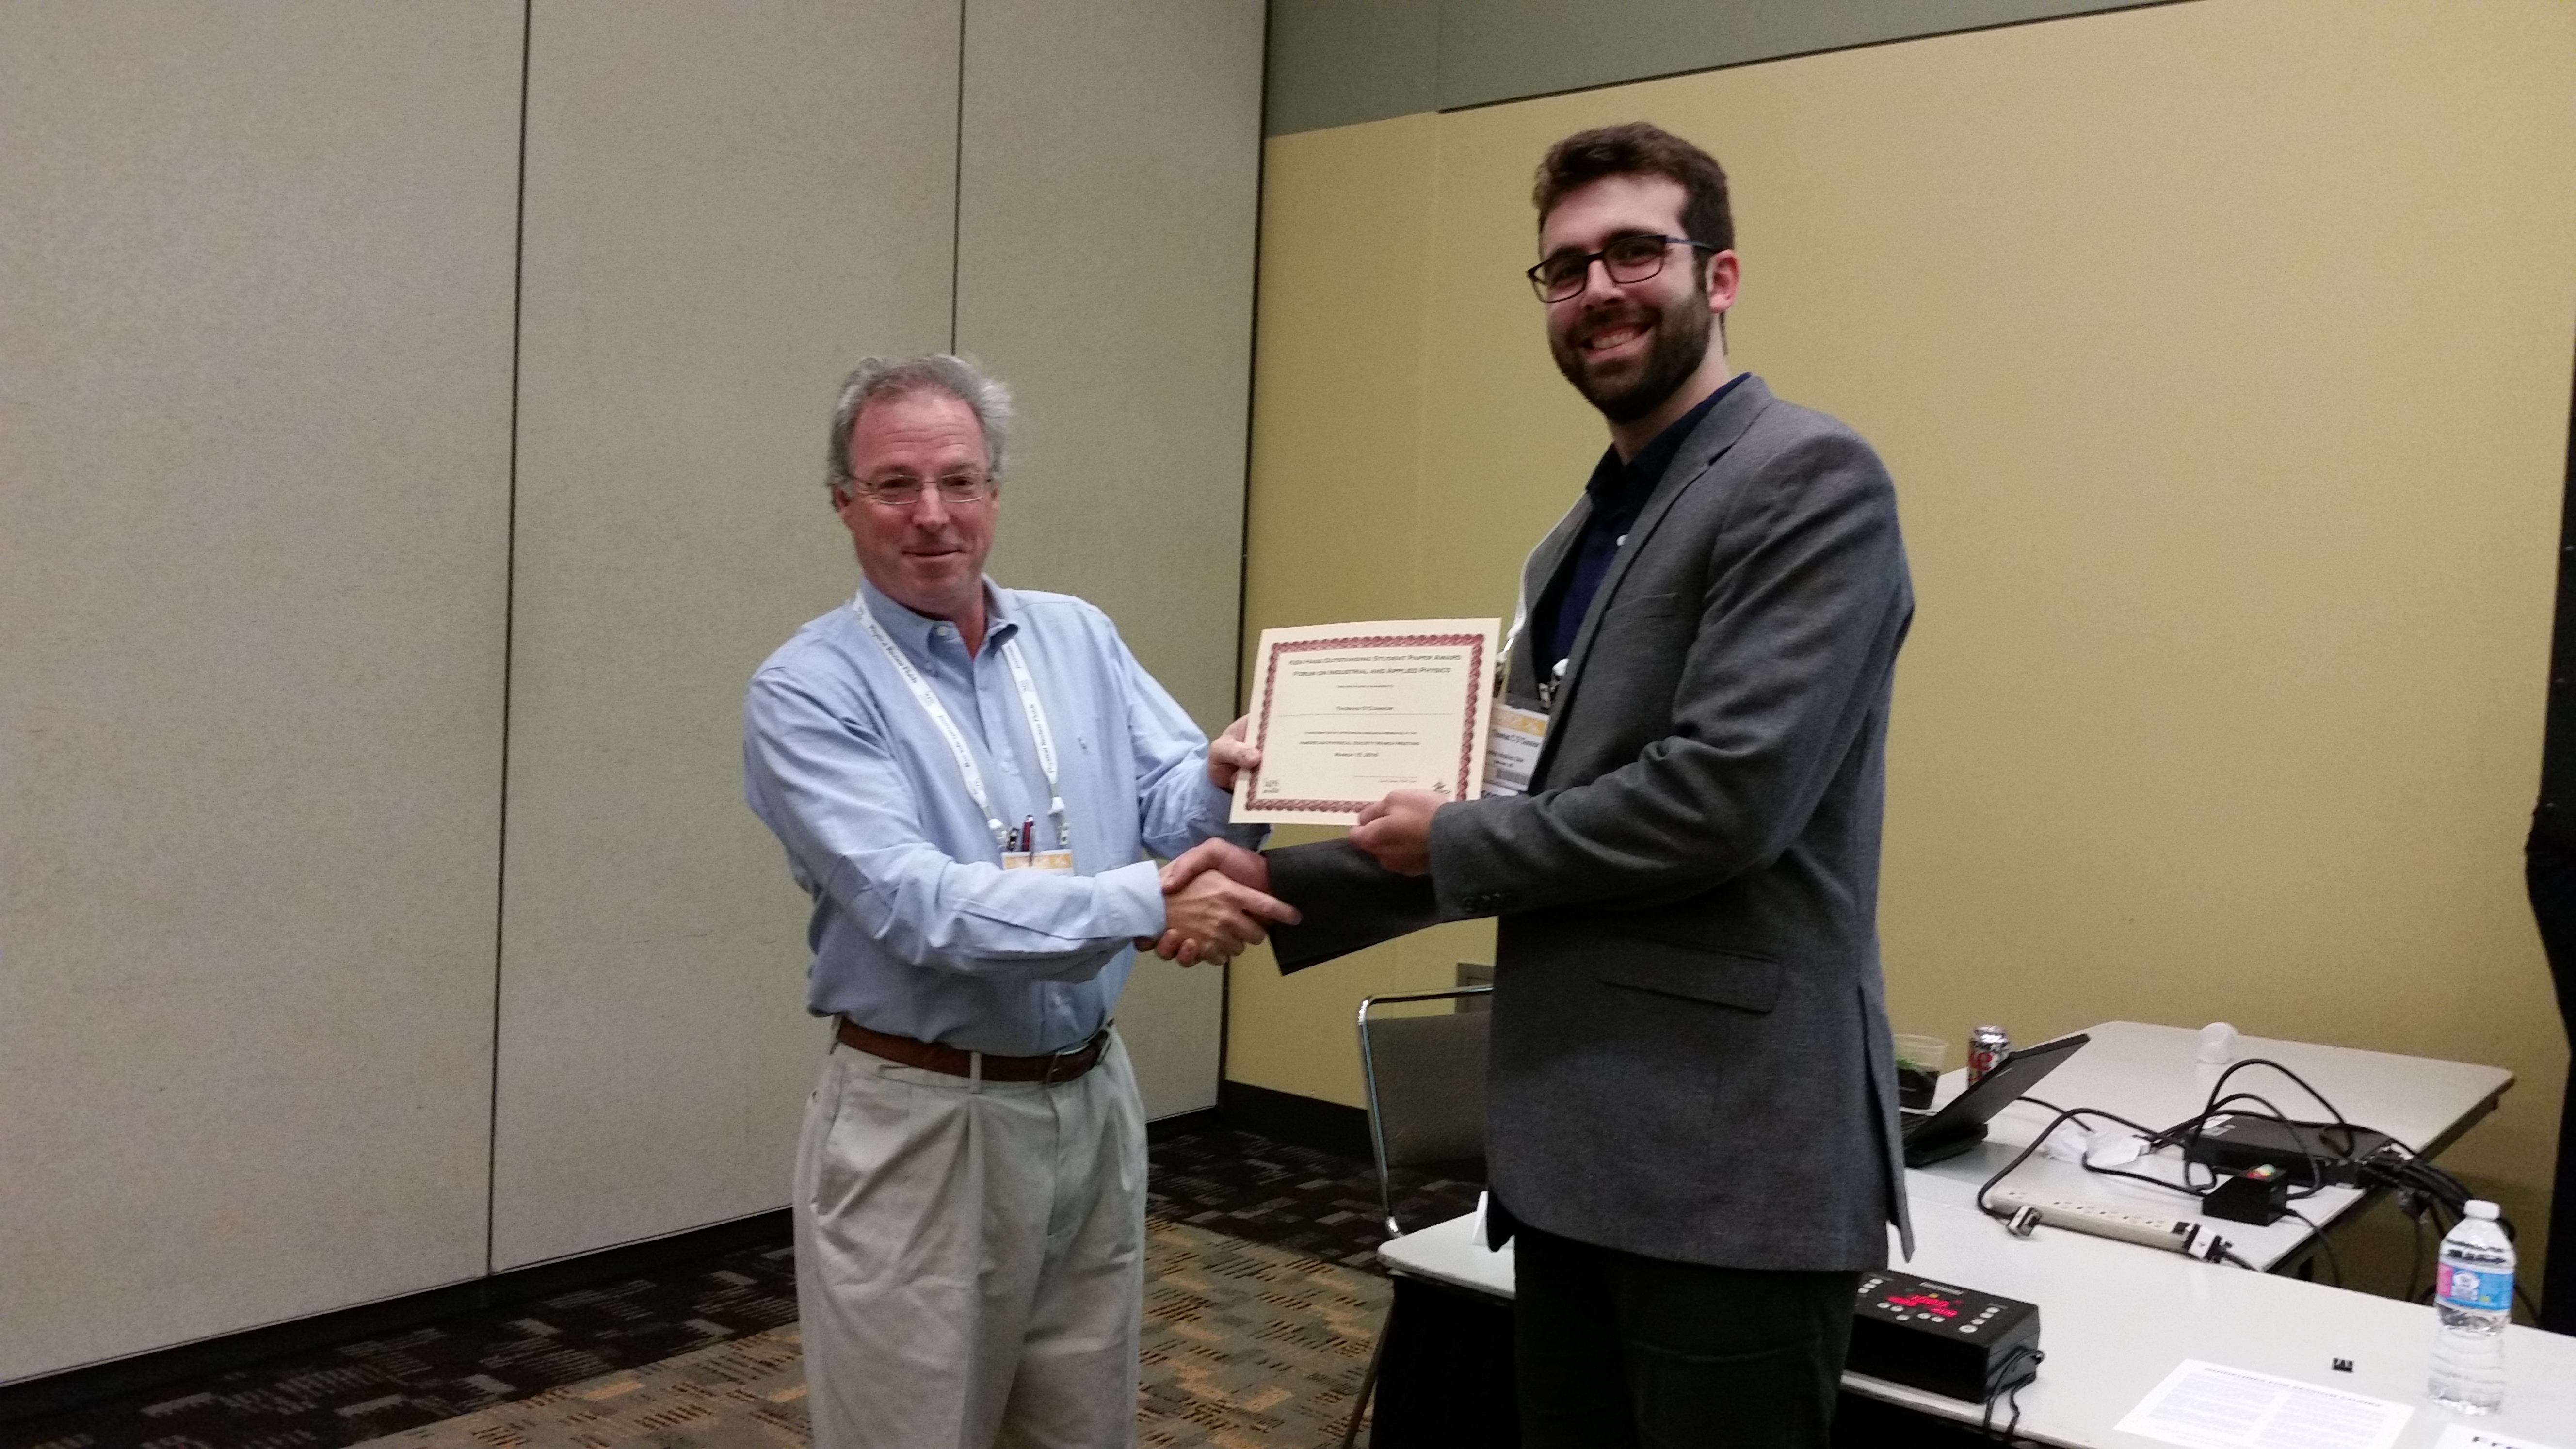 Thomas O'Connor (right) received the Ken Hass Outstanding Student Paper Award at the FIAP March meeting.